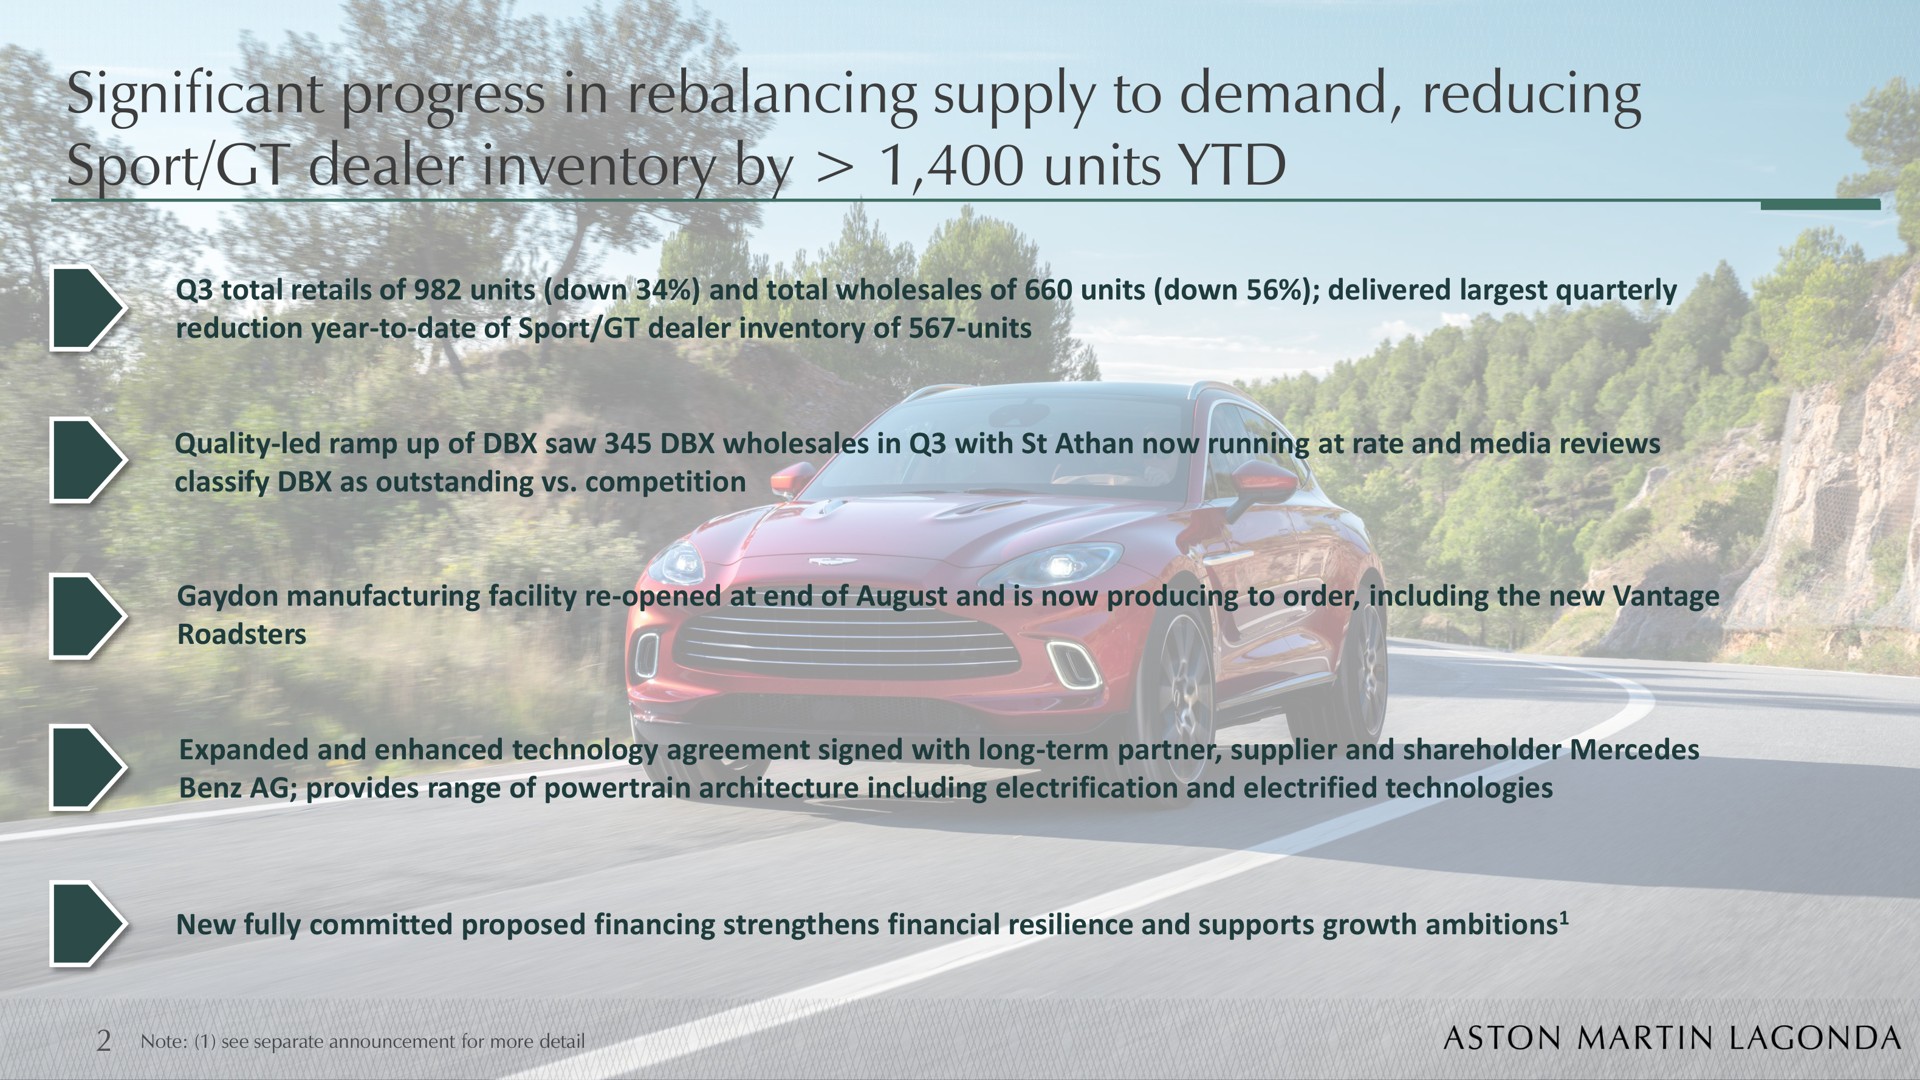 significant progress in supply to demand reducing sport dealer inventory by units | Aston Martin Lagonda